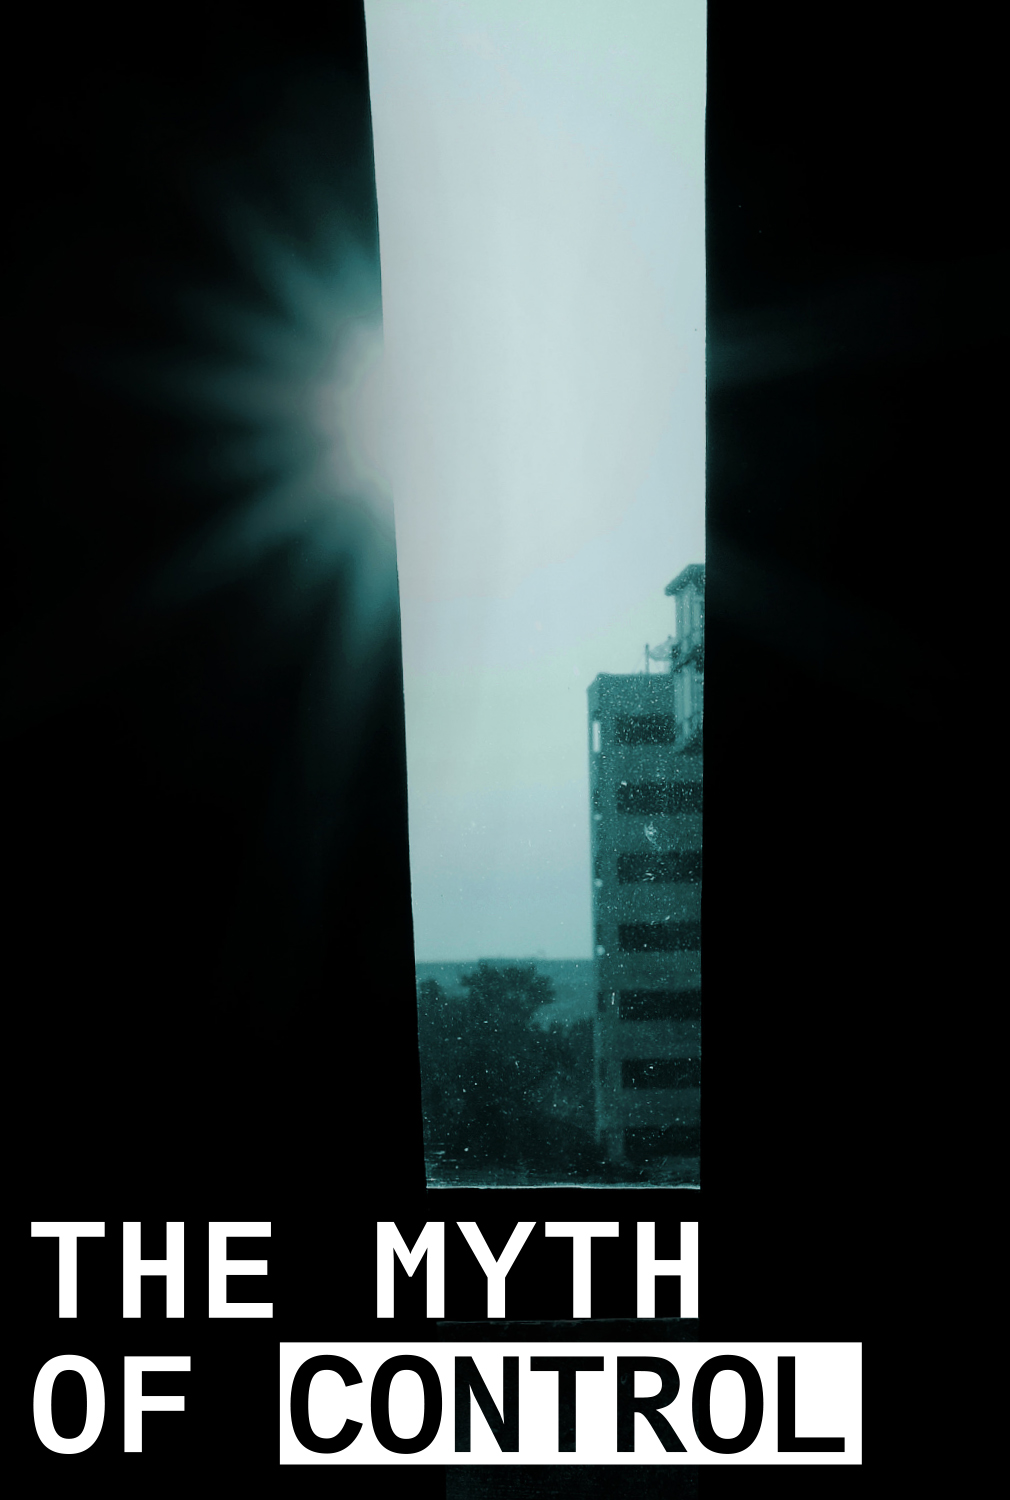 the myth of control poster showing city skyline between two buildings